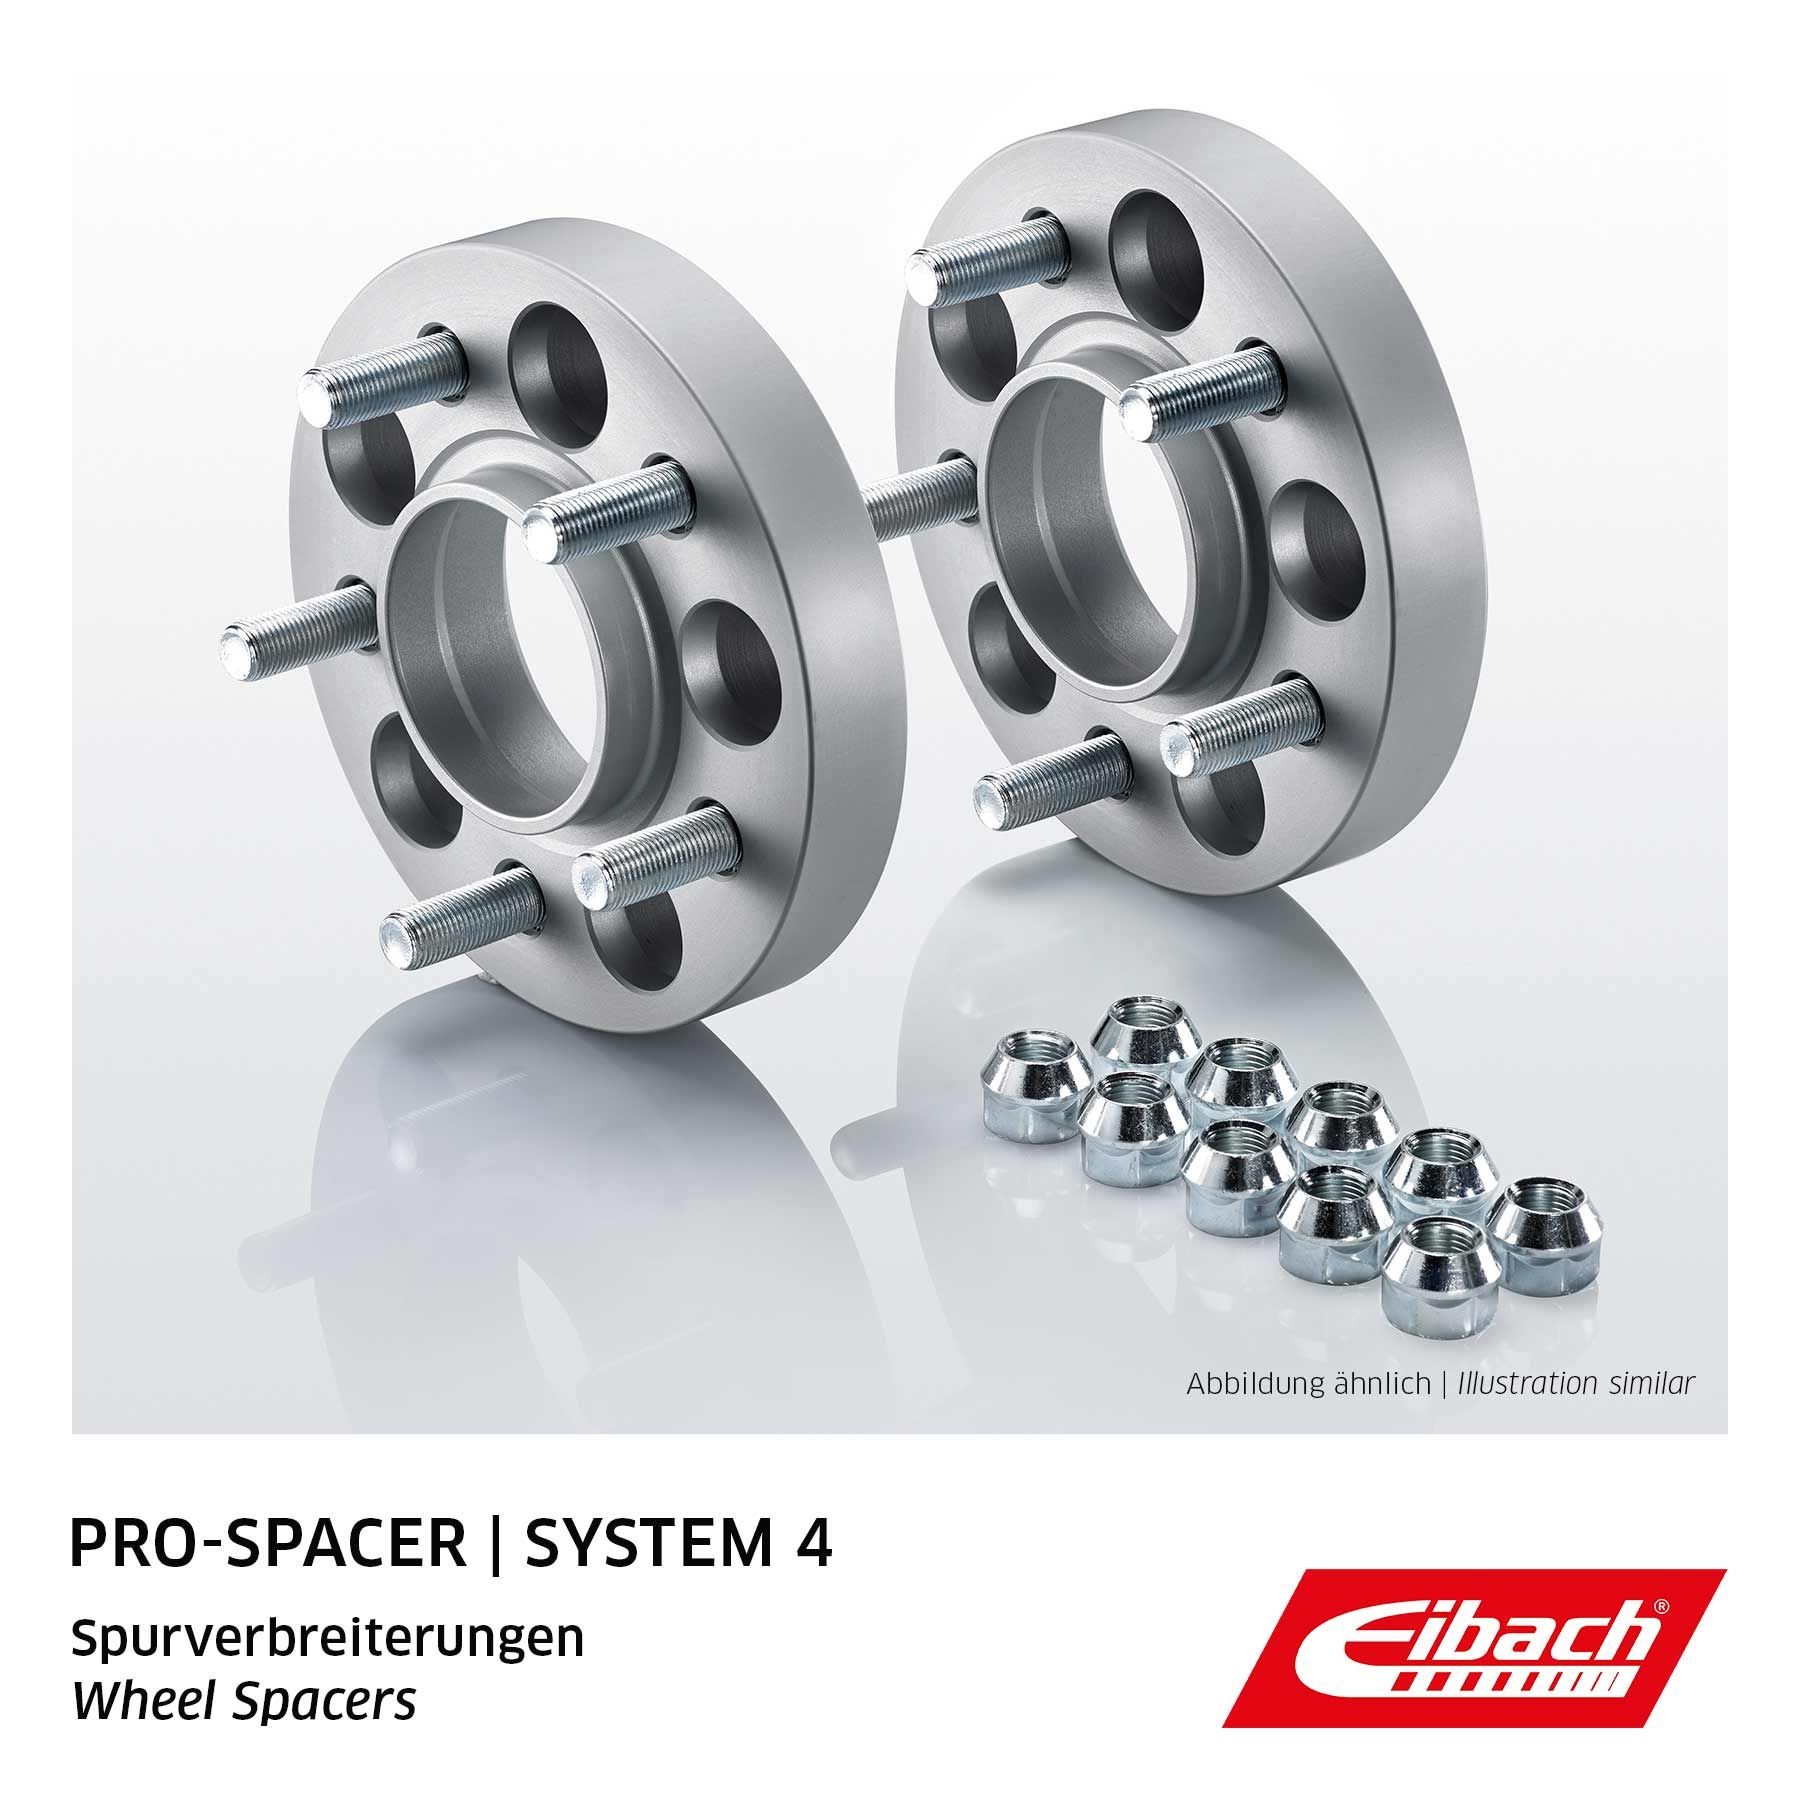 Opel Wheel spacer EIBACH S90-4-25-048 at a good price